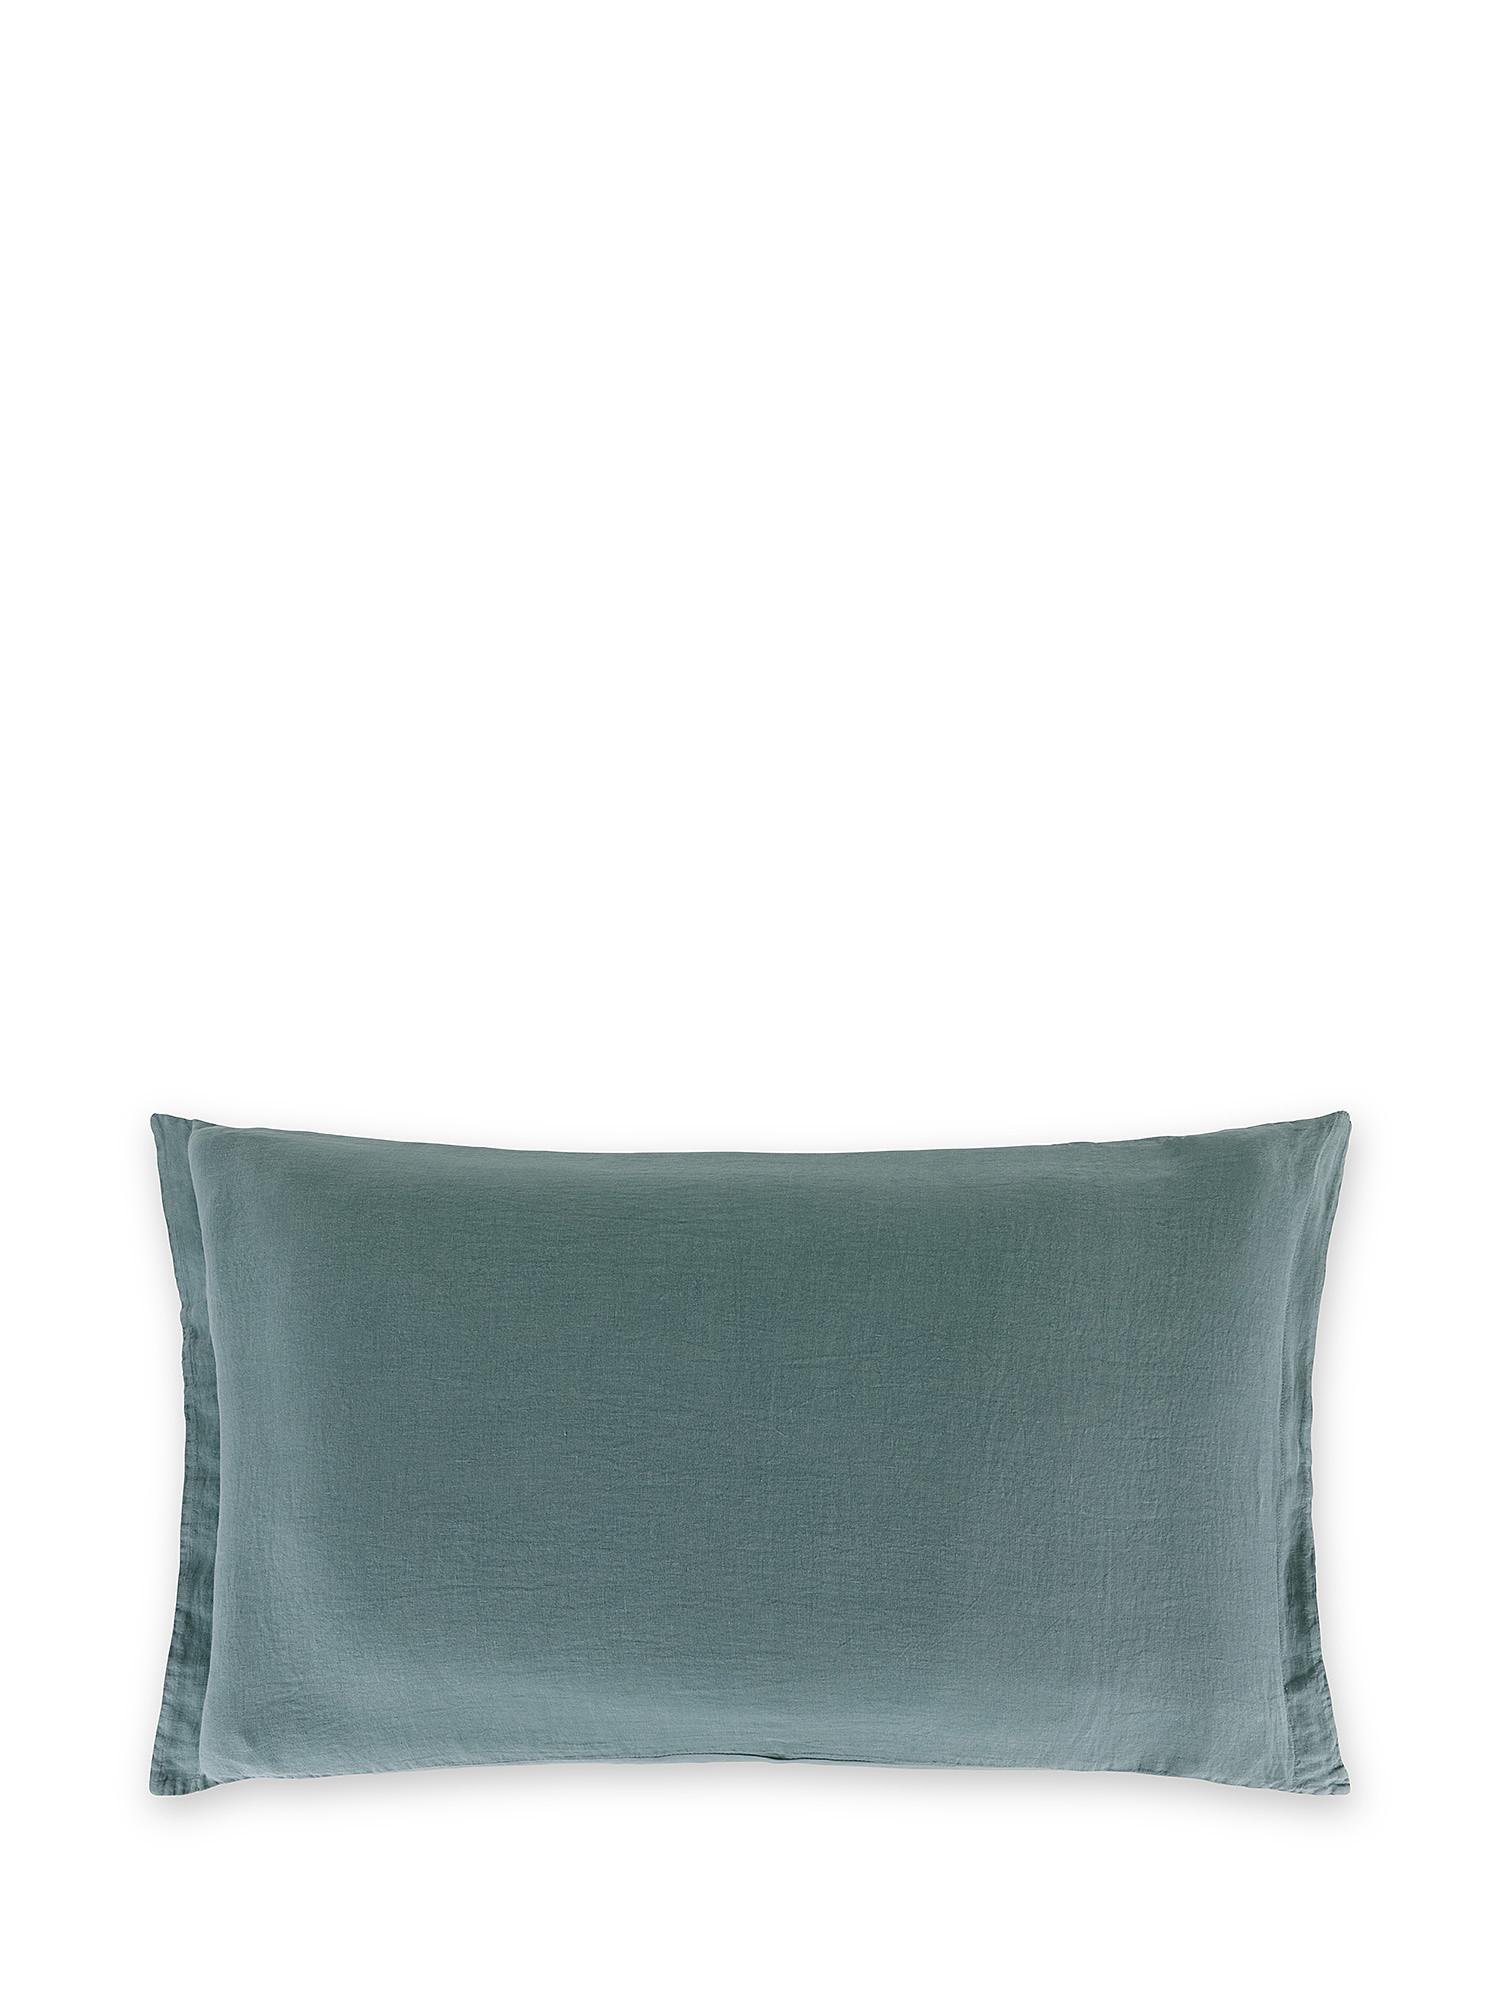 Zefiro plain color linen and cotton pillowcase, Green, large image number 0